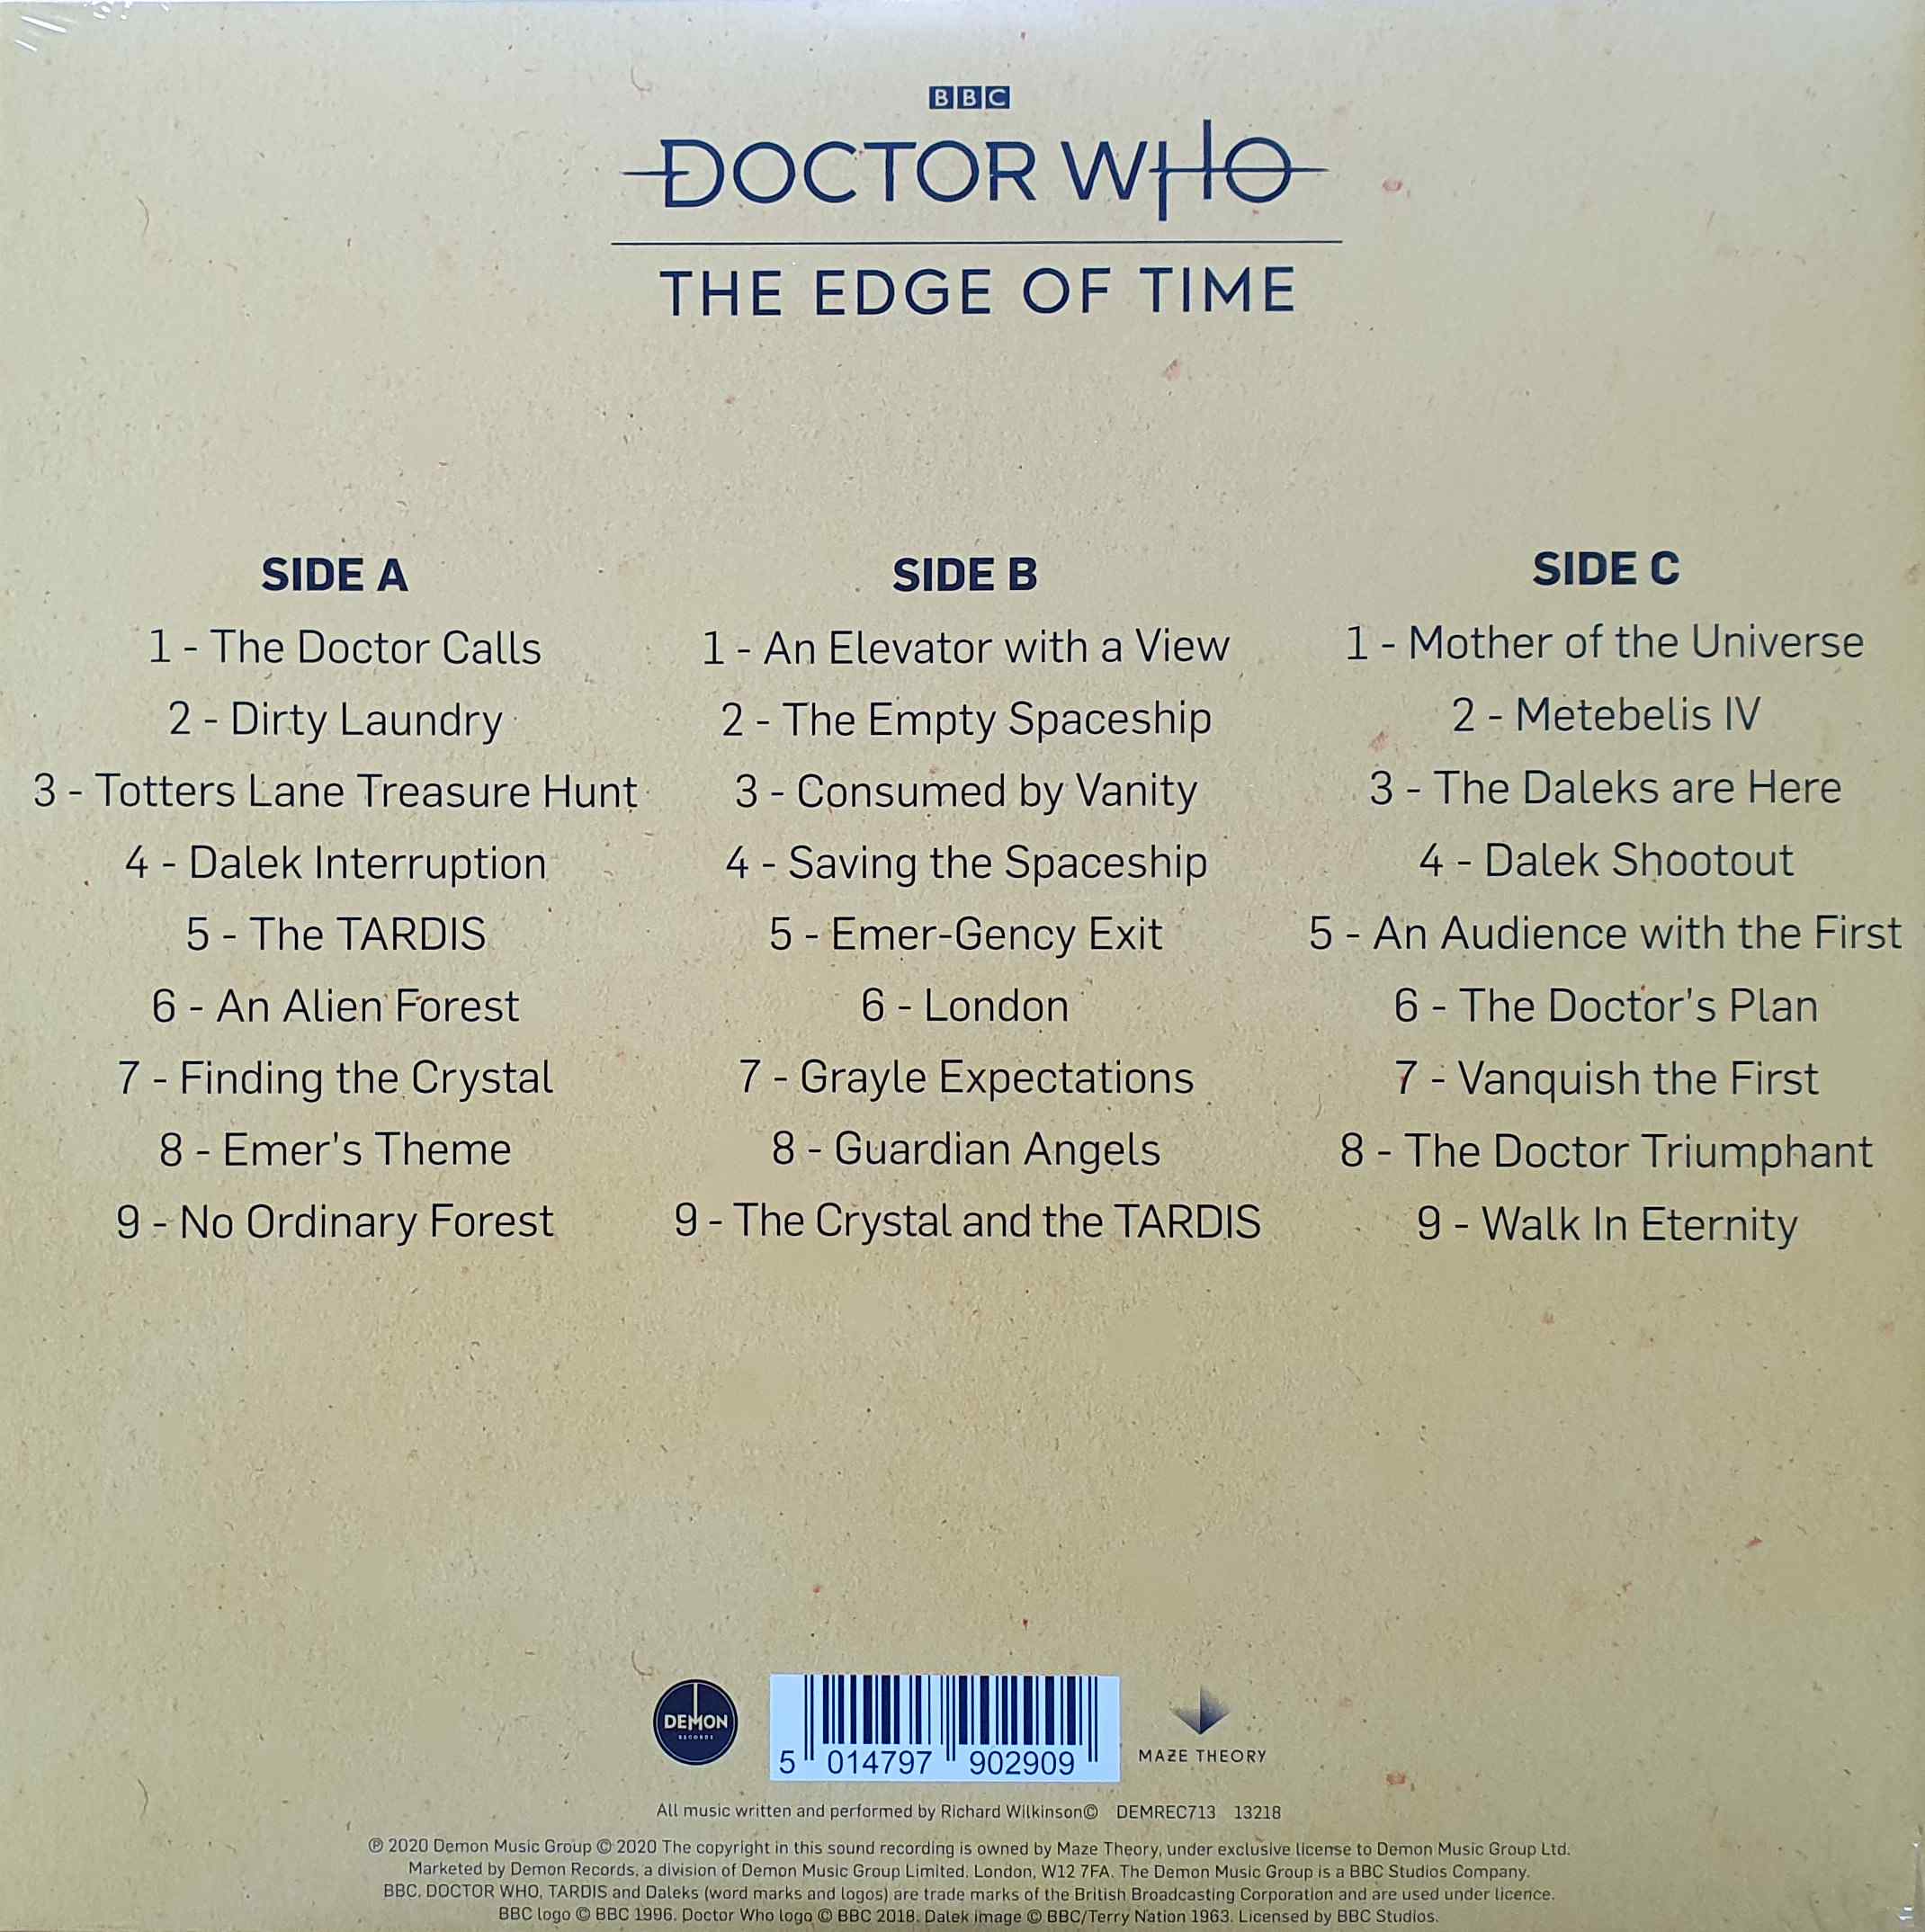 Picture of DEMREC 713 Doctor Who - The edge of time by artist Richard Wilkinson from the BBC records and Tapes library